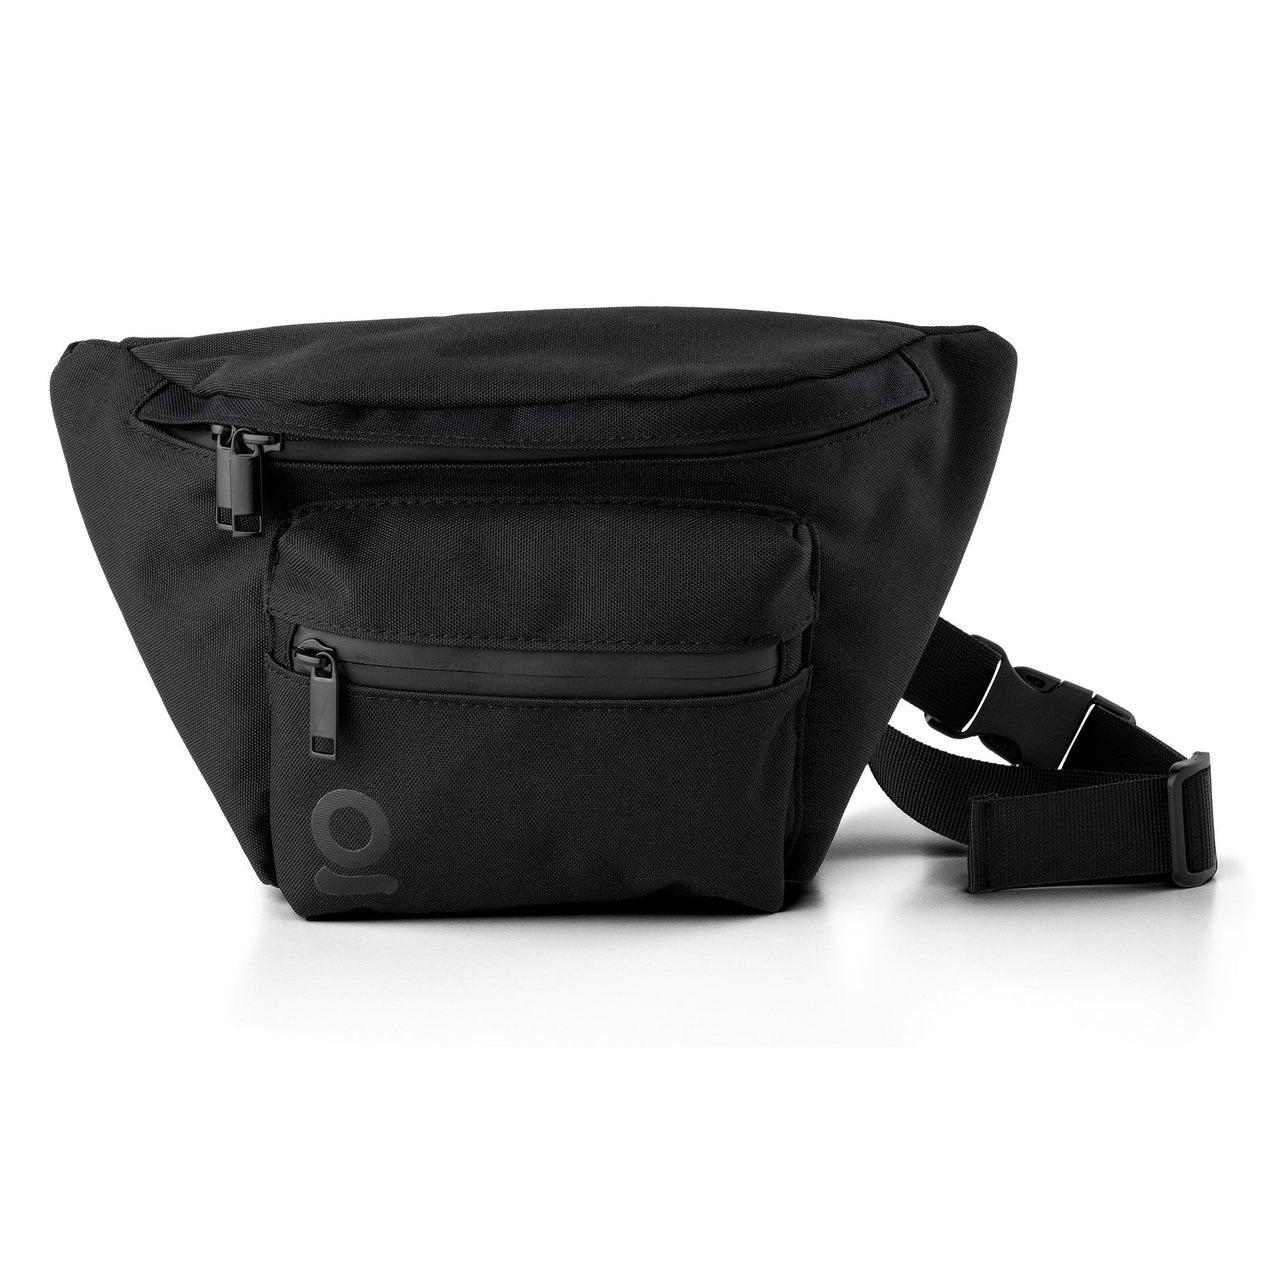 Ongrok Carbon-Lined Fanny Pack / Travel Pouch